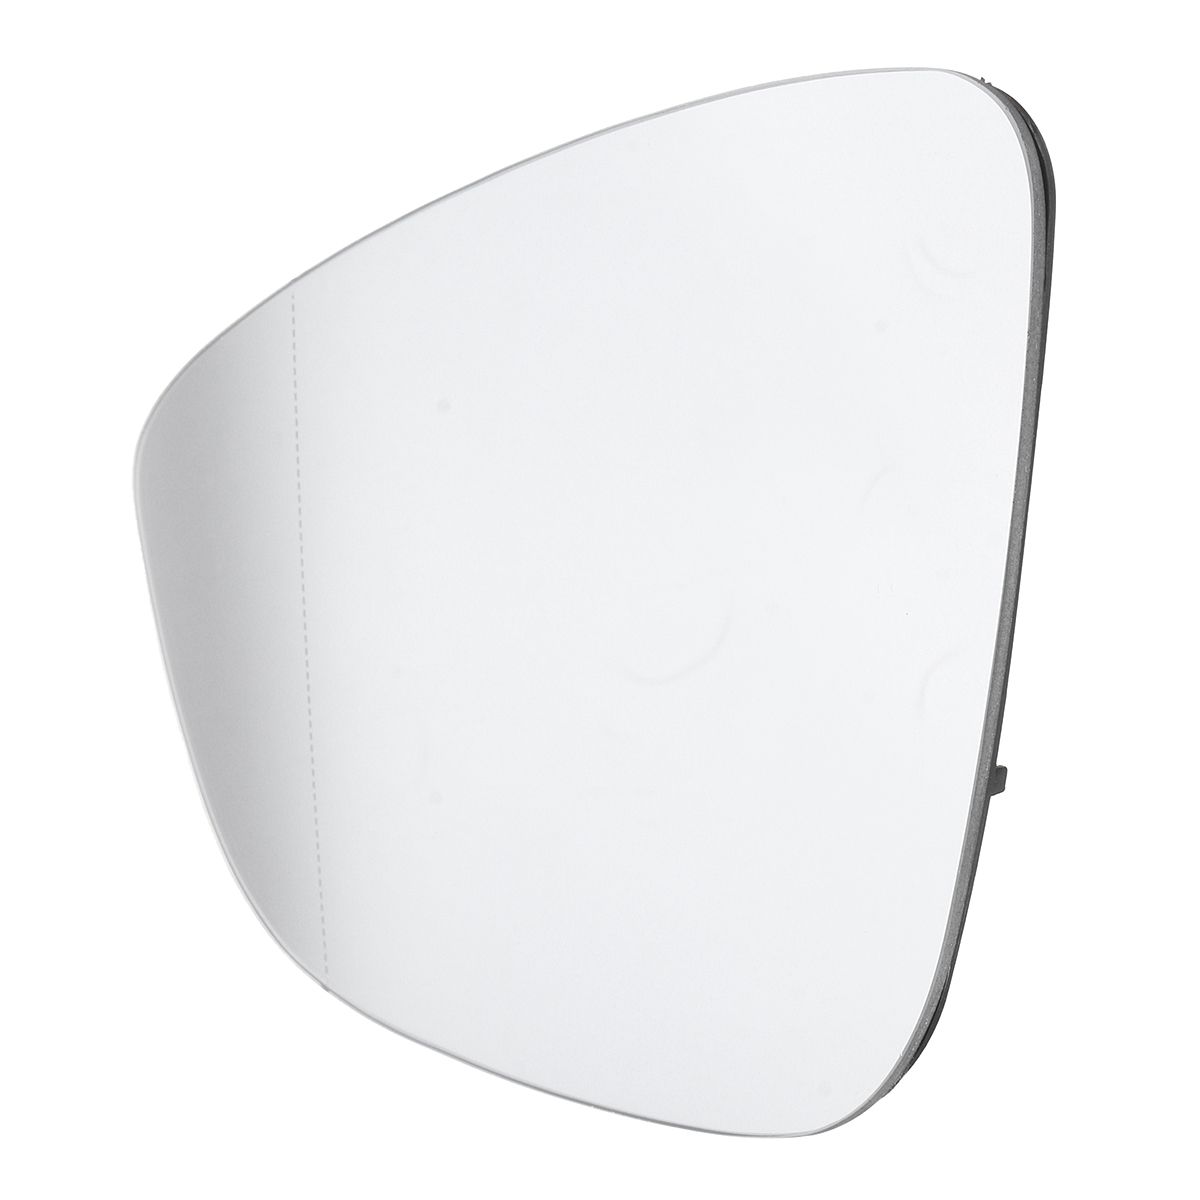 Car-Left-Side-Exterior-Wing-Mirror-Glass-Rear-View-WHeating-For-VW-PASSAT-CC-EOS-1141525